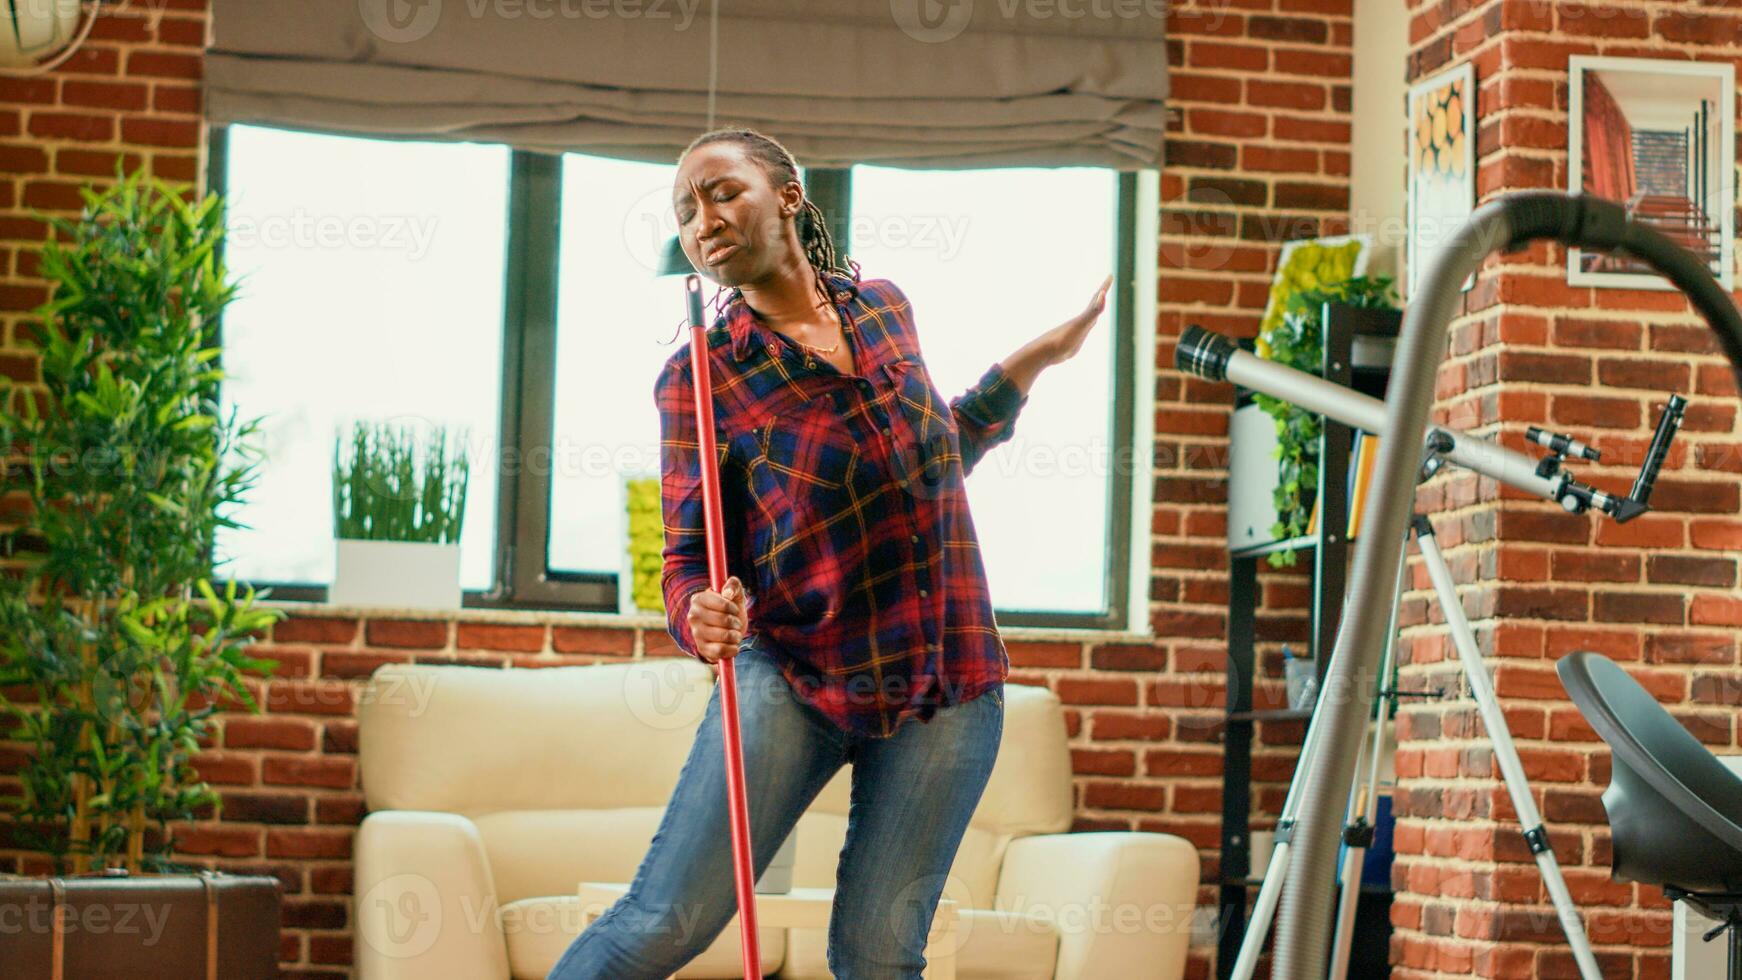 Female adult dancing and having fun cleaning household, listening to music and doing dance moves in living room. Modern housewife enjoying washing wooden floors with mop. Handheld shot. photo